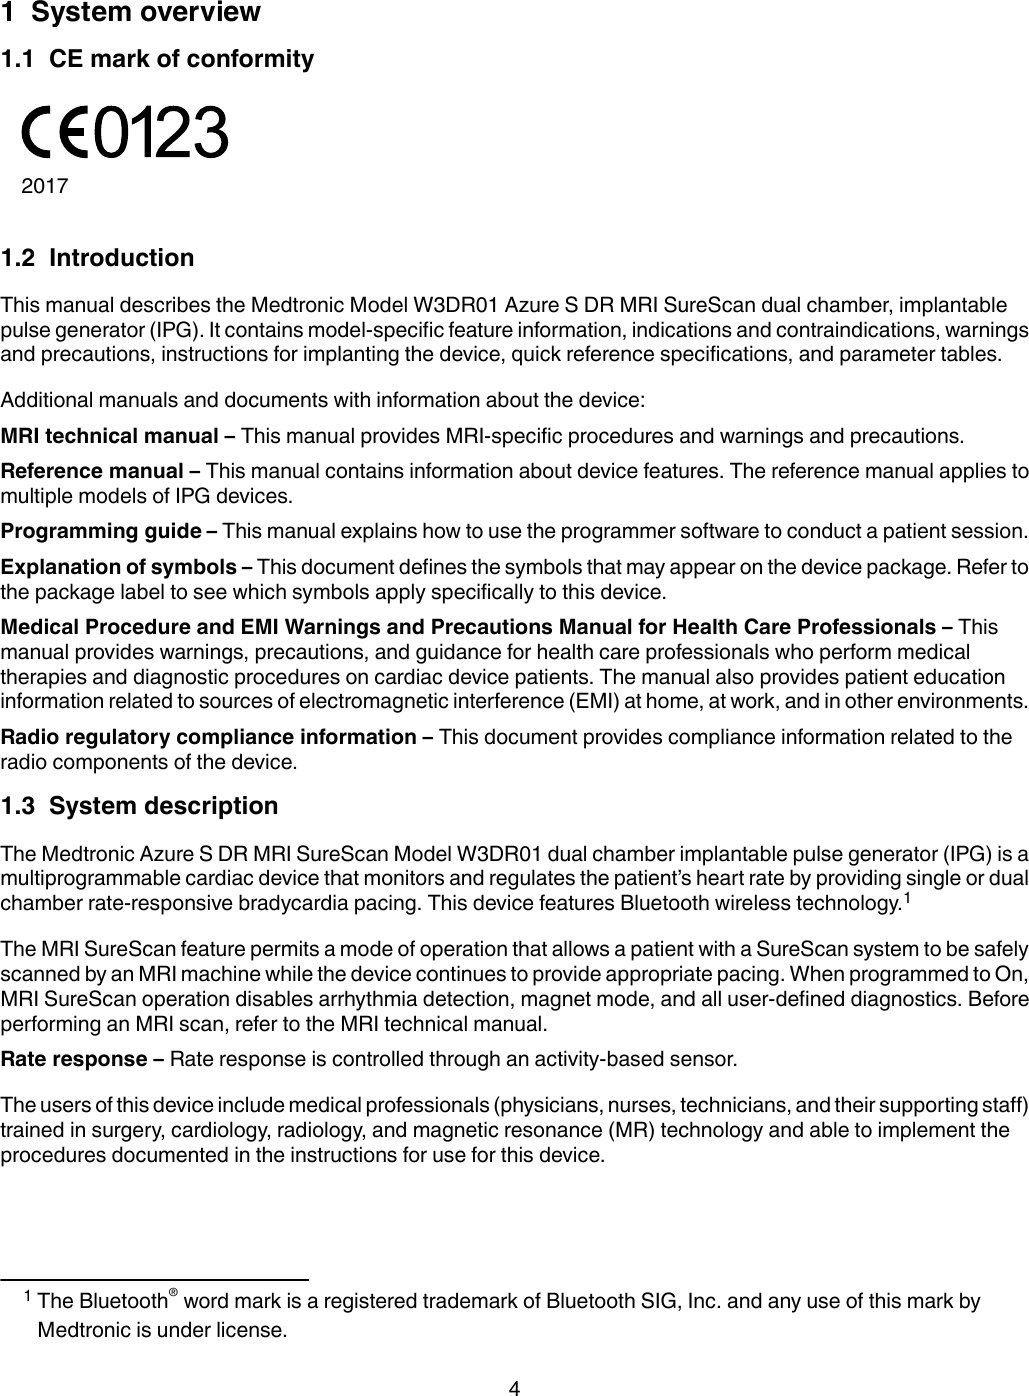 1  System overview1.1  CE mark of conformity20171.2  IntroductionThis manual describes the Medtronic Model W3DR01 Azure S DR MRI SureScan dual chamber, implantablepulse generator (IPG). It contains model-specific feature information, indications and contraindications, warningsand precautions, instructions for implanting the device, quick reference specifications, and parameter tables.Additional manuals and documents with information about the device:MRI technical manual – This manual provides MRI-specific procedures and warnings and precautions.Reference manual – This manual contains information about device features. The reference manual applies tomultiple models of IPG devices.Programming guide – This manual explains how to use the programmer software to conduct a patient session.Explanation of symbols – This document defines the symbols that may appear on the device package. Refer tothe package label to see which symbols apply specifically to this device.Medical Procedure and EMI Warnings and Precautions Manual for Health Care Professionals – Thismanual provides warnings, precautions, and guidance for health care professionals who perform medicaltherapies and diagnostic procedures on cardiac device patients. The manual also provides patient educationinformation related to sources of electromagnetic interference (EMI) at home, at work, and in other environments.Radio regulatory compliance information – This document provides compliance information related to theradio components of the device.1.3  System descriptionThe Medtronic Azure S DR MRI SureScan Model W3DR01 dual chamber implantable pulse generator (IPG) is amultiprogrammable cardiac device that monitors and regulates the patient’s heart rate by providing single or dualchamber rate-responsive bradycardia pacing. This device features Bluetooth wireless technology.1The MRI SureScan feature permits a mode of operation that allows a patient with a SureScan system to be safelyscanned by an MRI machine while the device continues to provide appropriate pacing. When programmed to On,MRI SureScan operation disables arrhythmia detection, magnet mode, and all user-defined diagnostics. Beforeperforming an MRI scan, refer to the MRI technical manual.Rate response – Rate response is controlled through an activity-based sensor.The users of this device include medical professionals (physicians, nurses, technicians, and their supporting staff)trained in surgery, cardiology, radiology, and magnetic resonance (MR) technology and able to implement theprocedures documented in the instructions for use for this device.1The Bluetooth® word mark is a registered trademark of Bluetooth SIG, Inc. and any use of this mark byMedtronic is under license.4